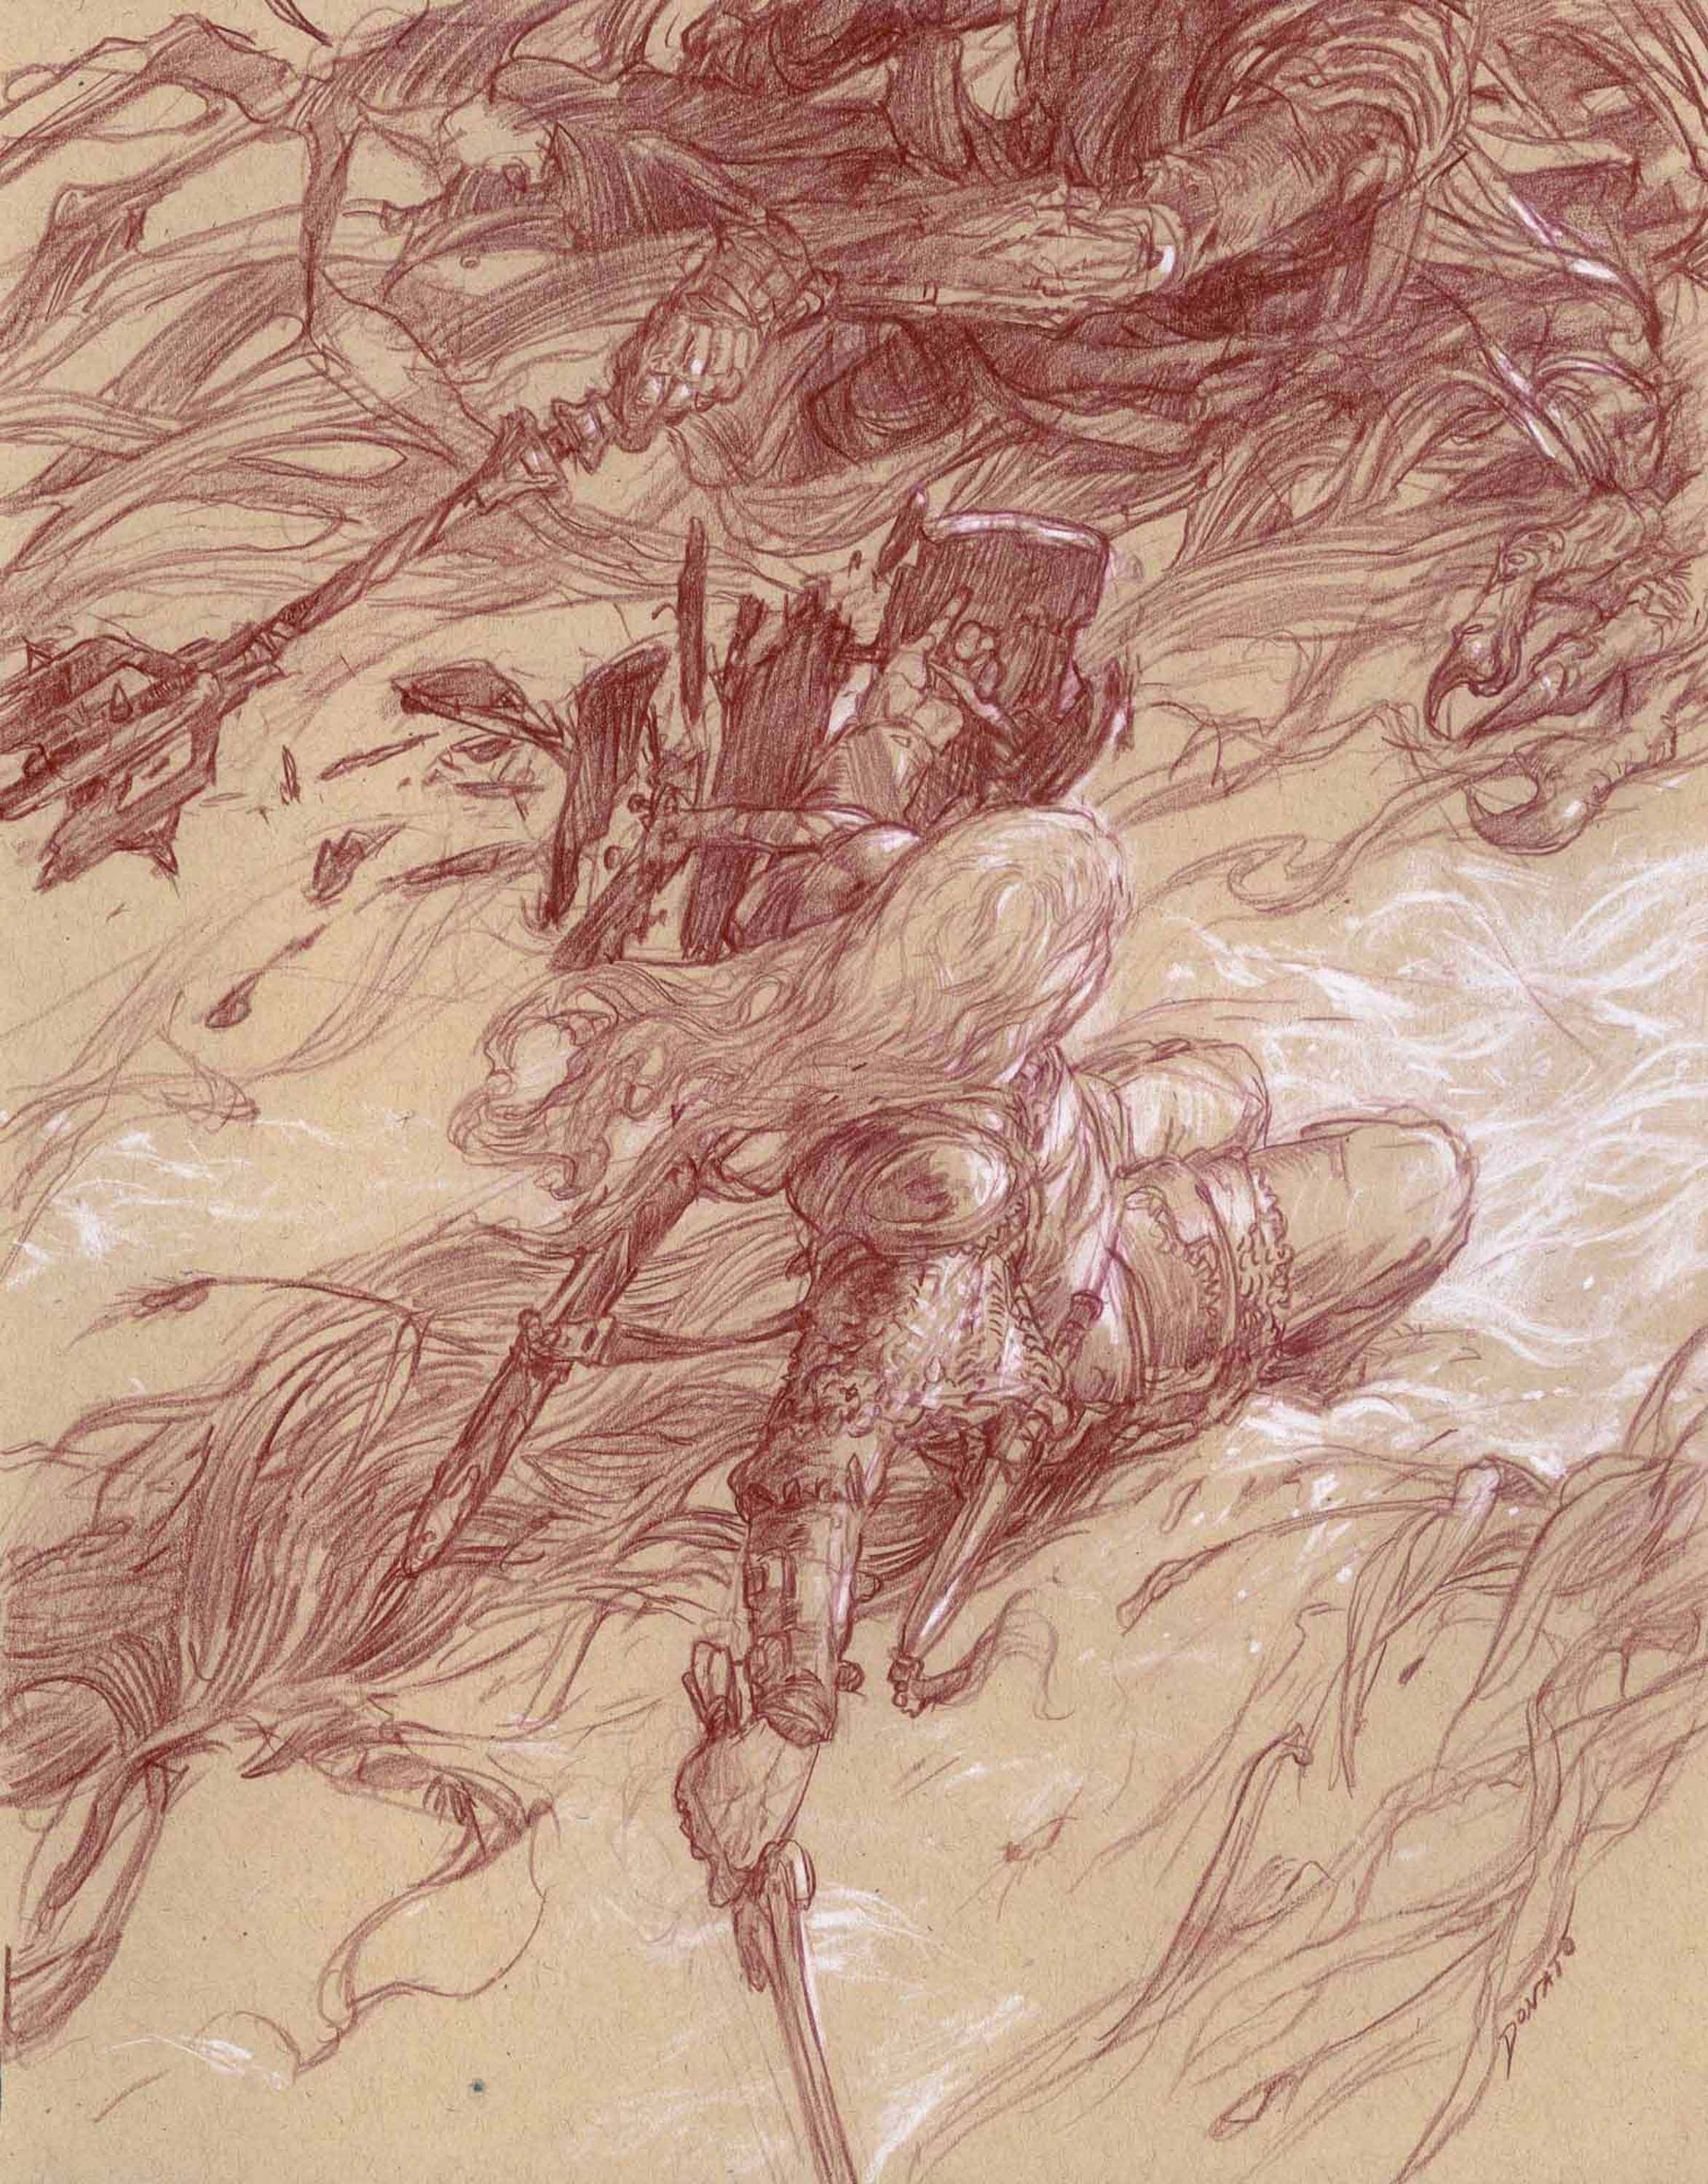 Éowyn - Shield Blow
11" x9"  Watercolor Pencil and Chalk on Toned paper 2011
private collection